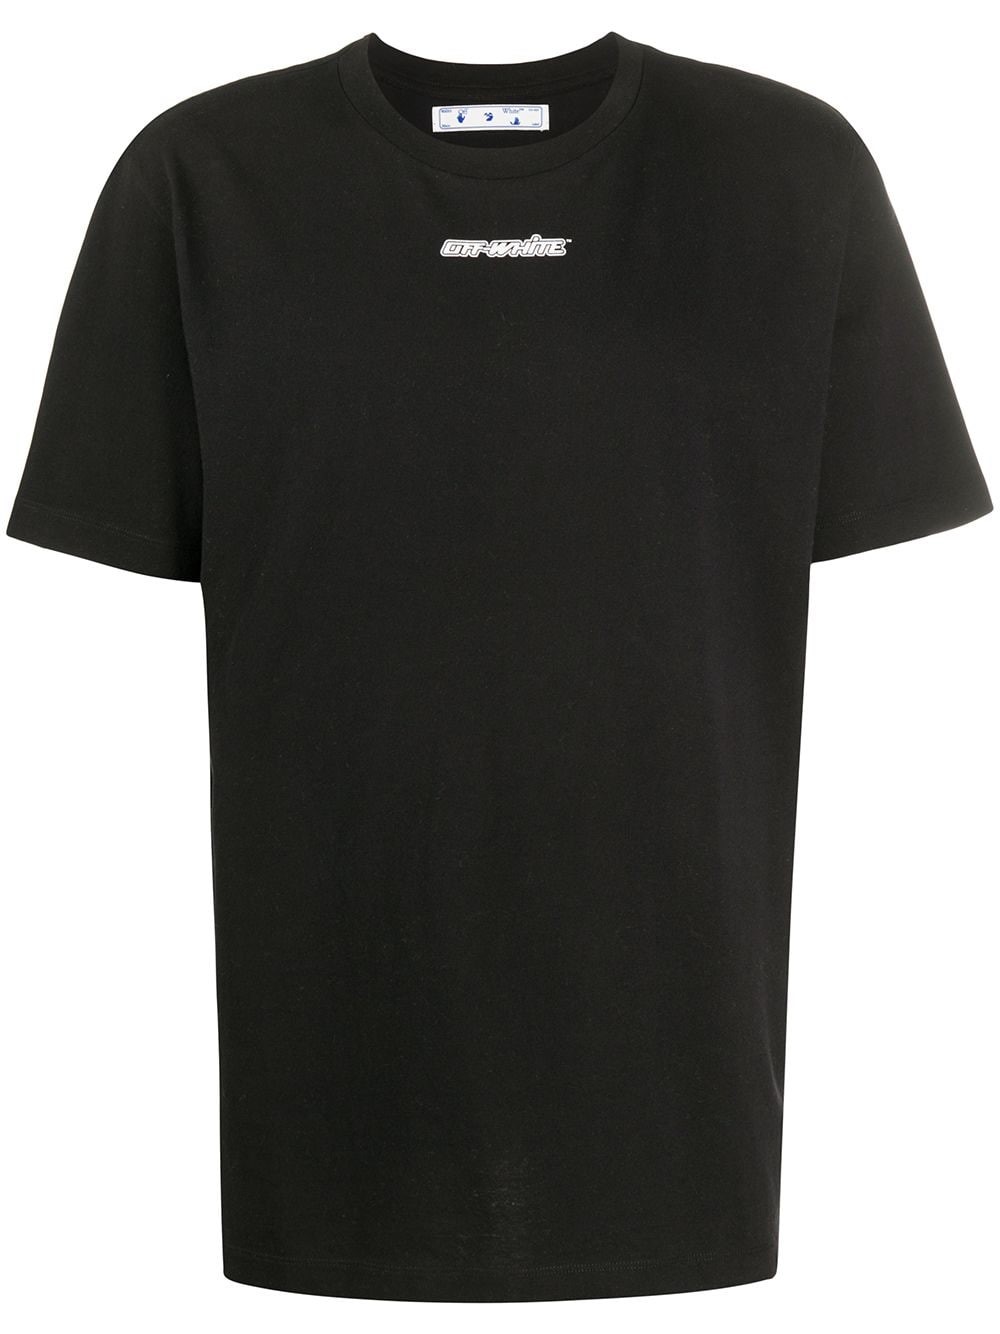 off-white MARKER T-SHIRT available on montiboutique.com - 34894